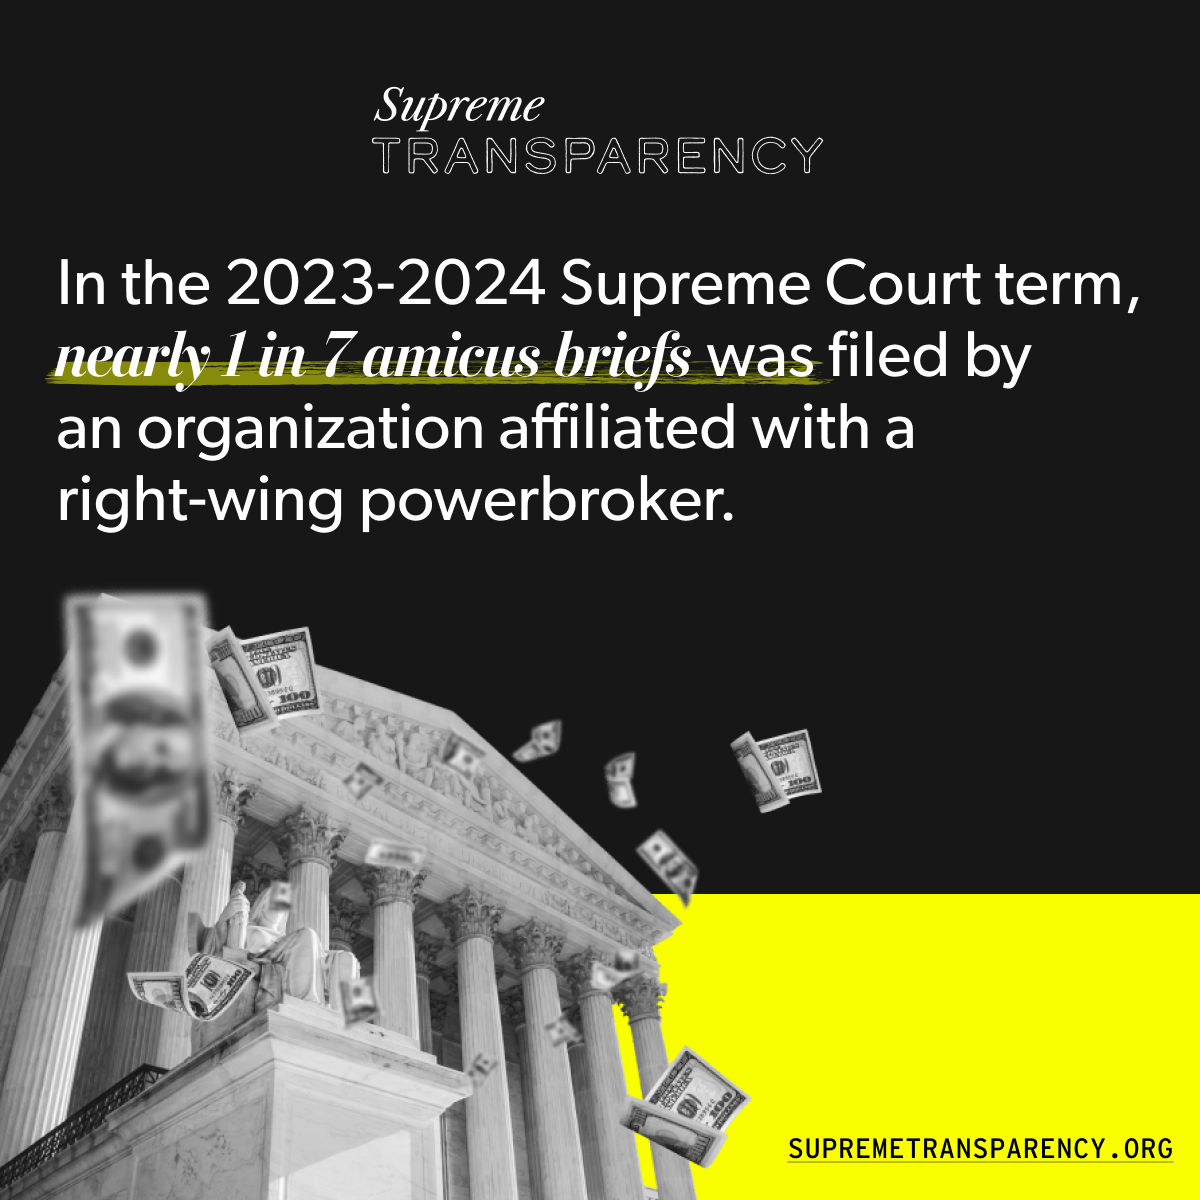 Supreme corruption demands #SupremeTransparency. With @revolvingdoorDC & @itstruenorth, we’re shedding light on the dangerous connections between #SCOTUS justices, the cases they’re hearing, and the money & relationships behind them both. Learn more: SupremeTransparency.org